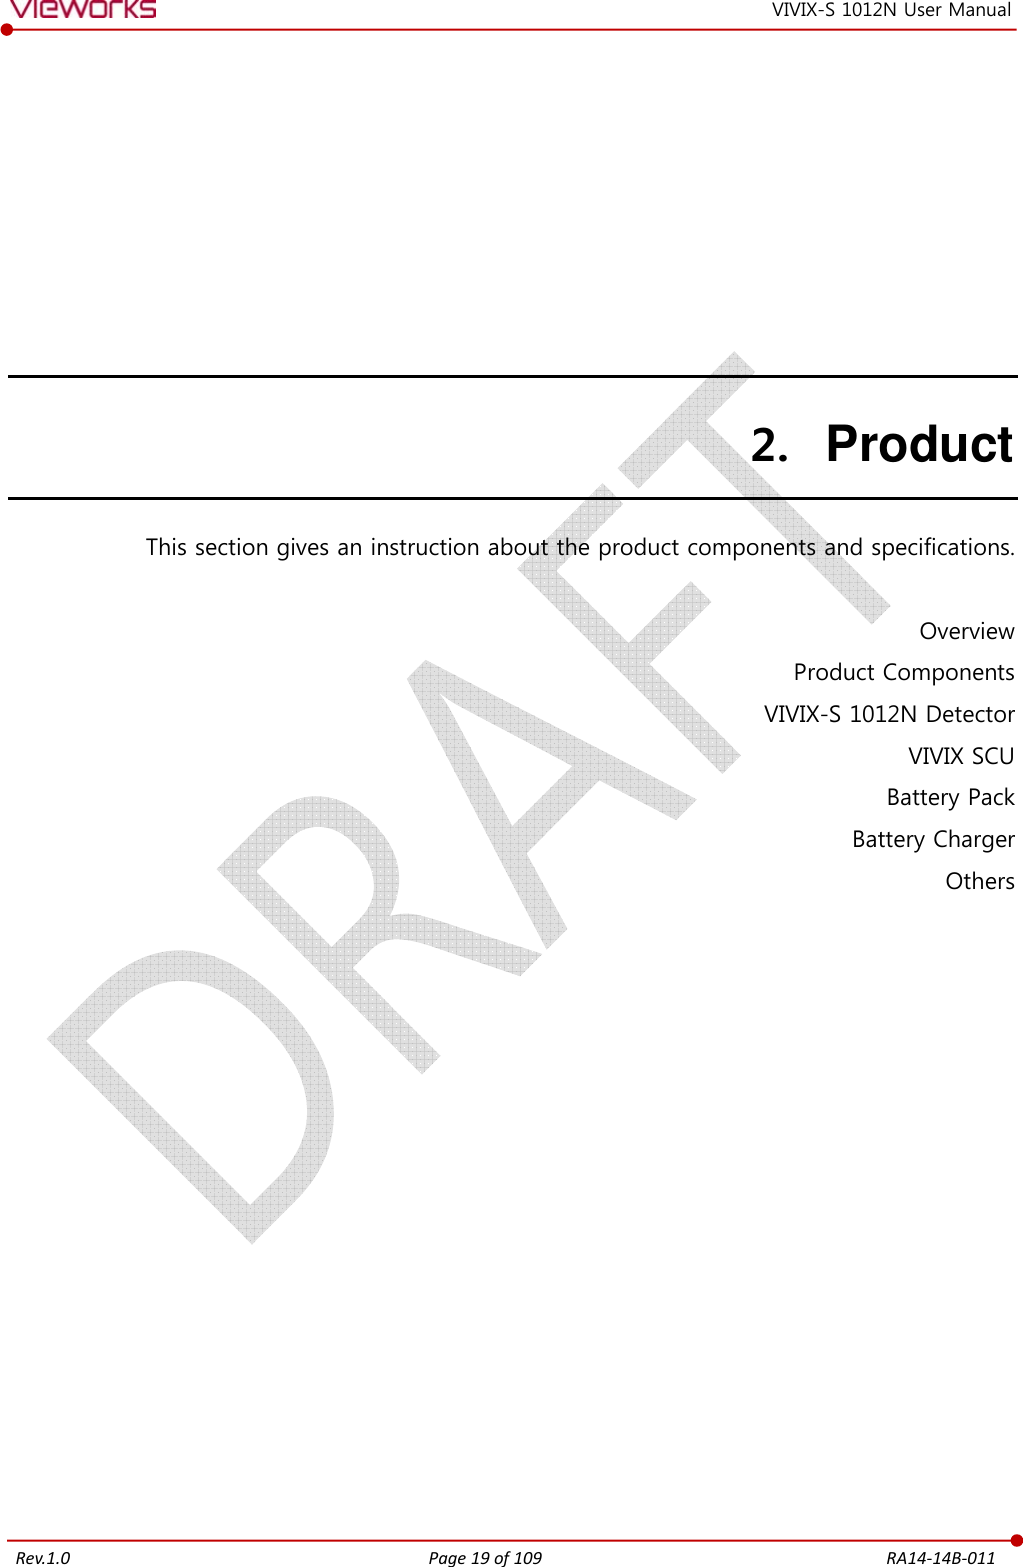   Rev.1.0 Page 19 of 109  RA14-14B-011 VIVIX-S 1012N User Manual 2. Product This section gives an instruction about the product components and specifications.  Overview Product Components VIVIX-S 1012N Detector VIVIX SCU Battery Pack Battery Charger Others     